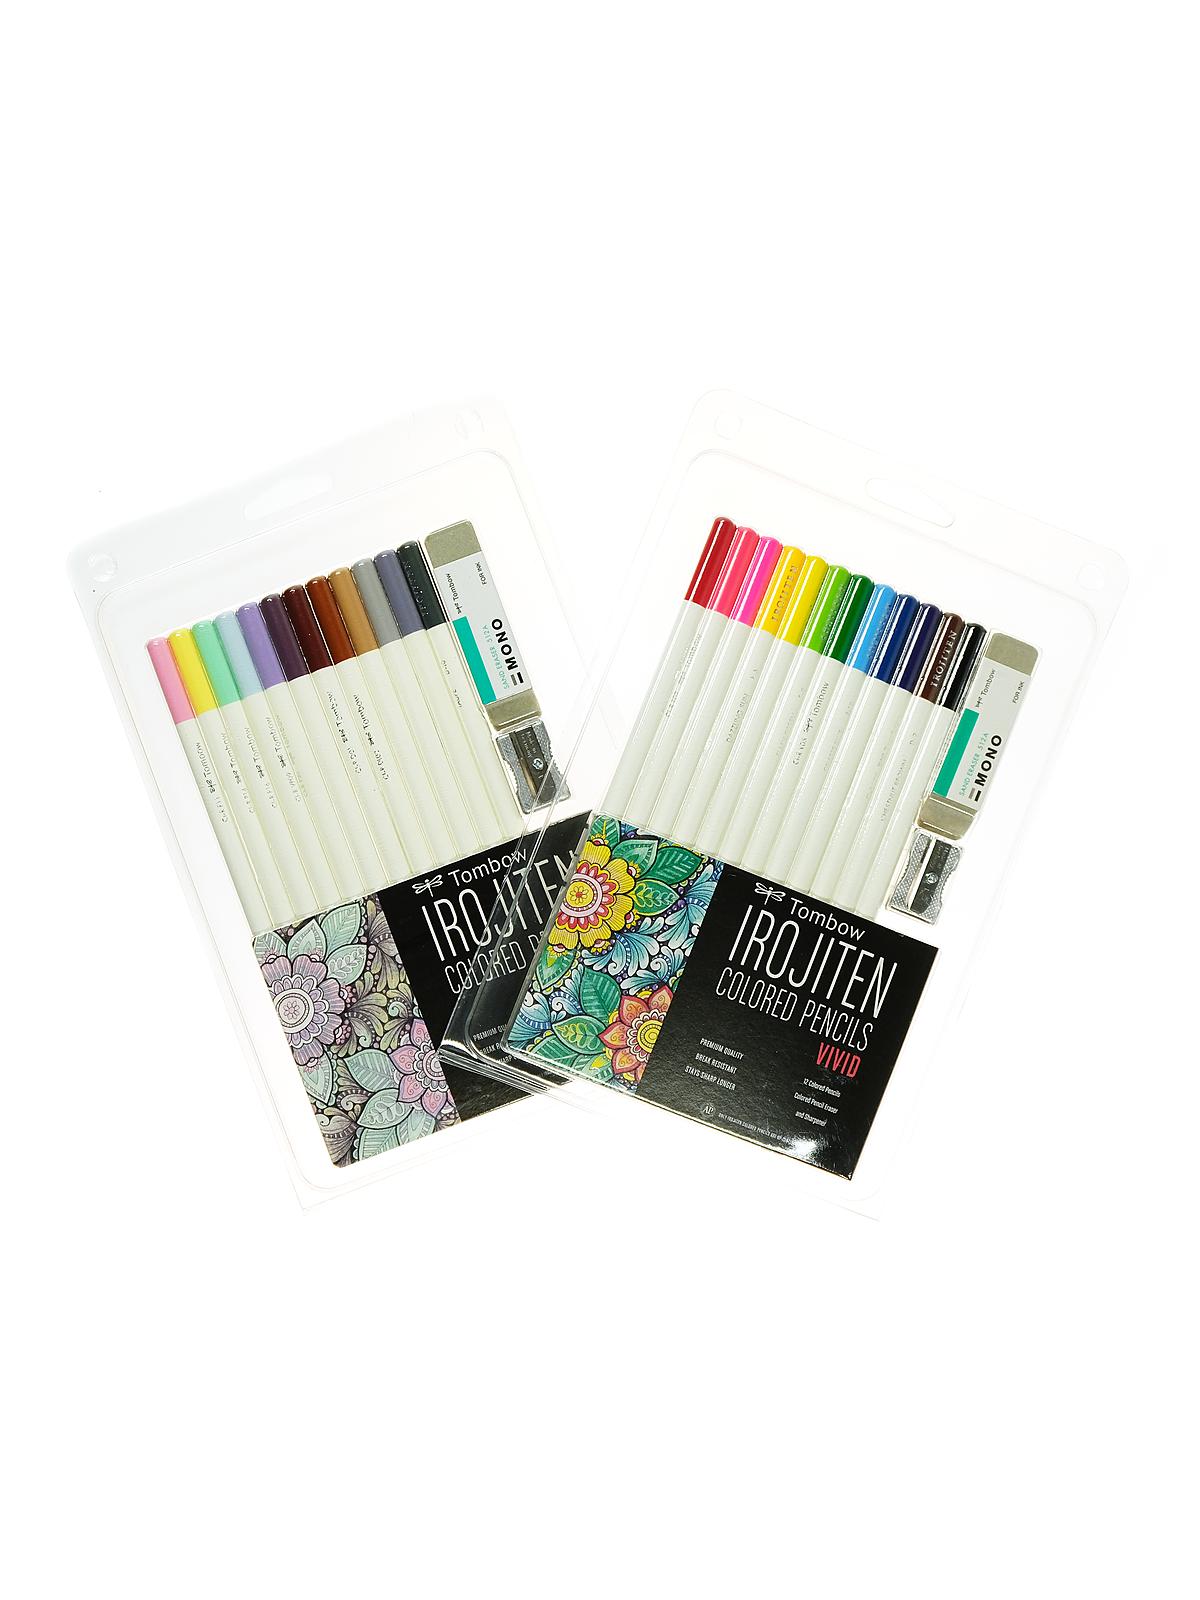 Tombow - Irojiten Colored Pencil Sets